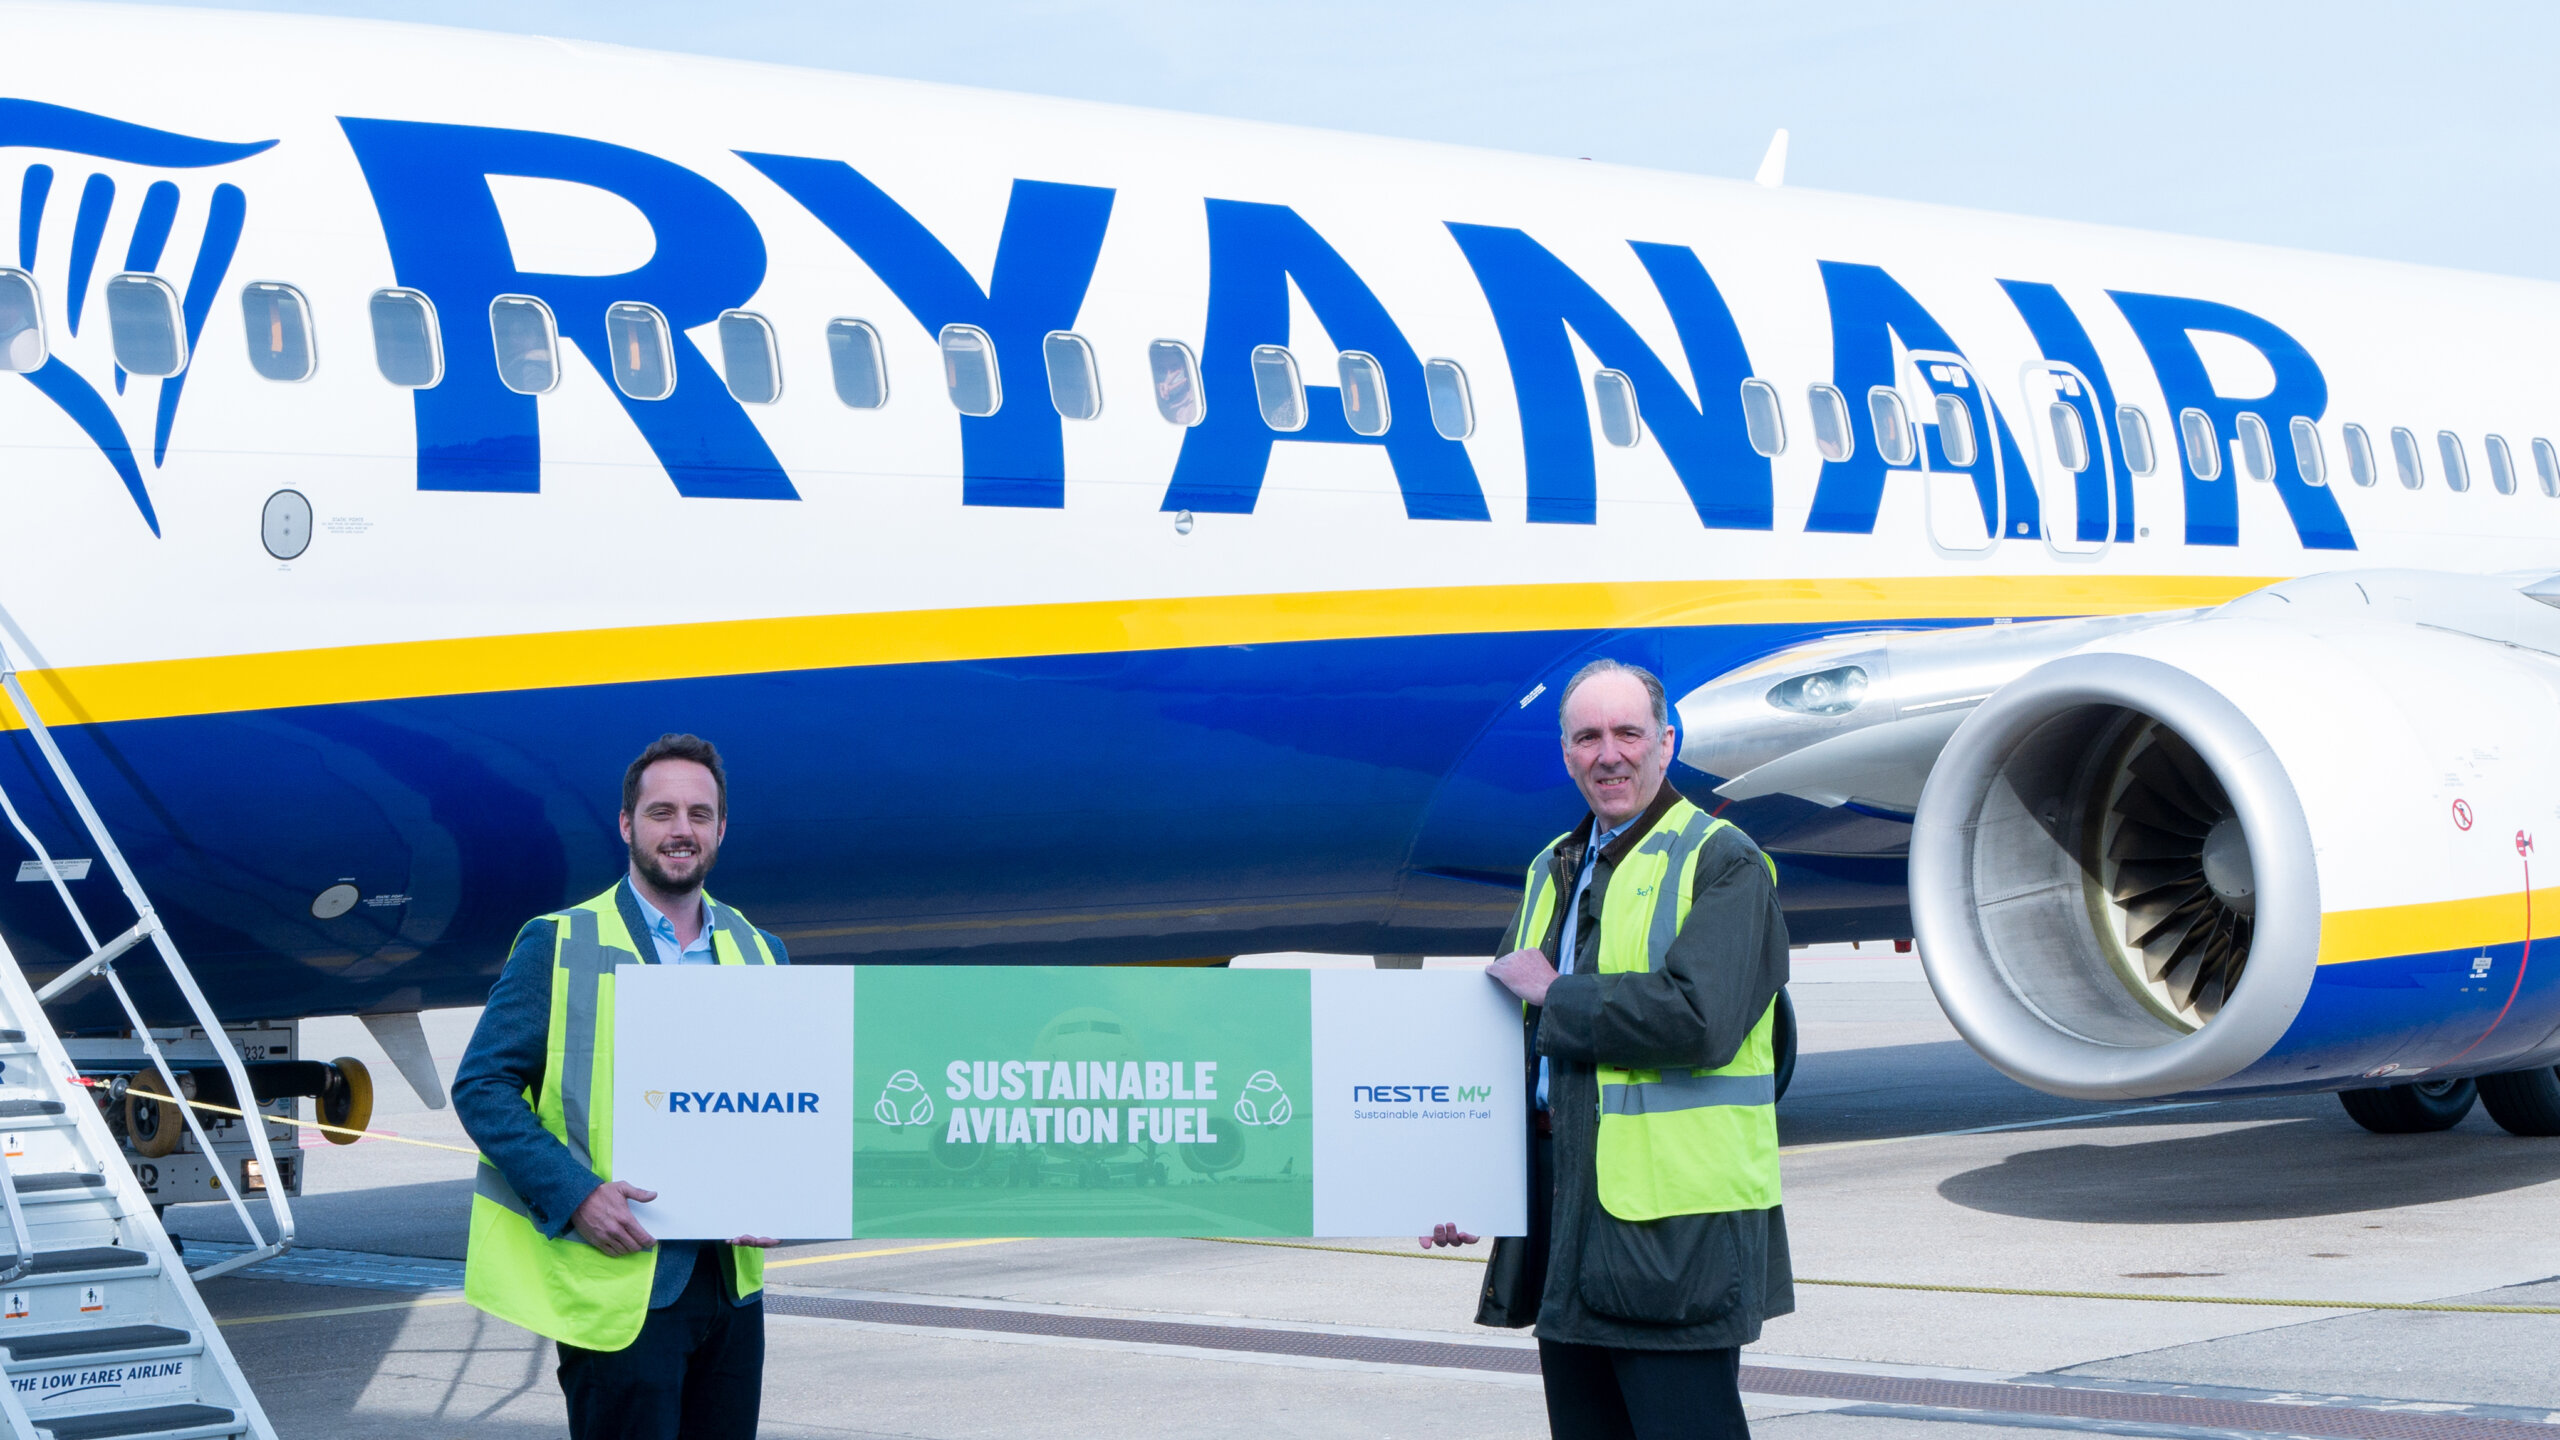 Ryanair Partners With Neste Holland To Power Flights With 40% SAF Blend